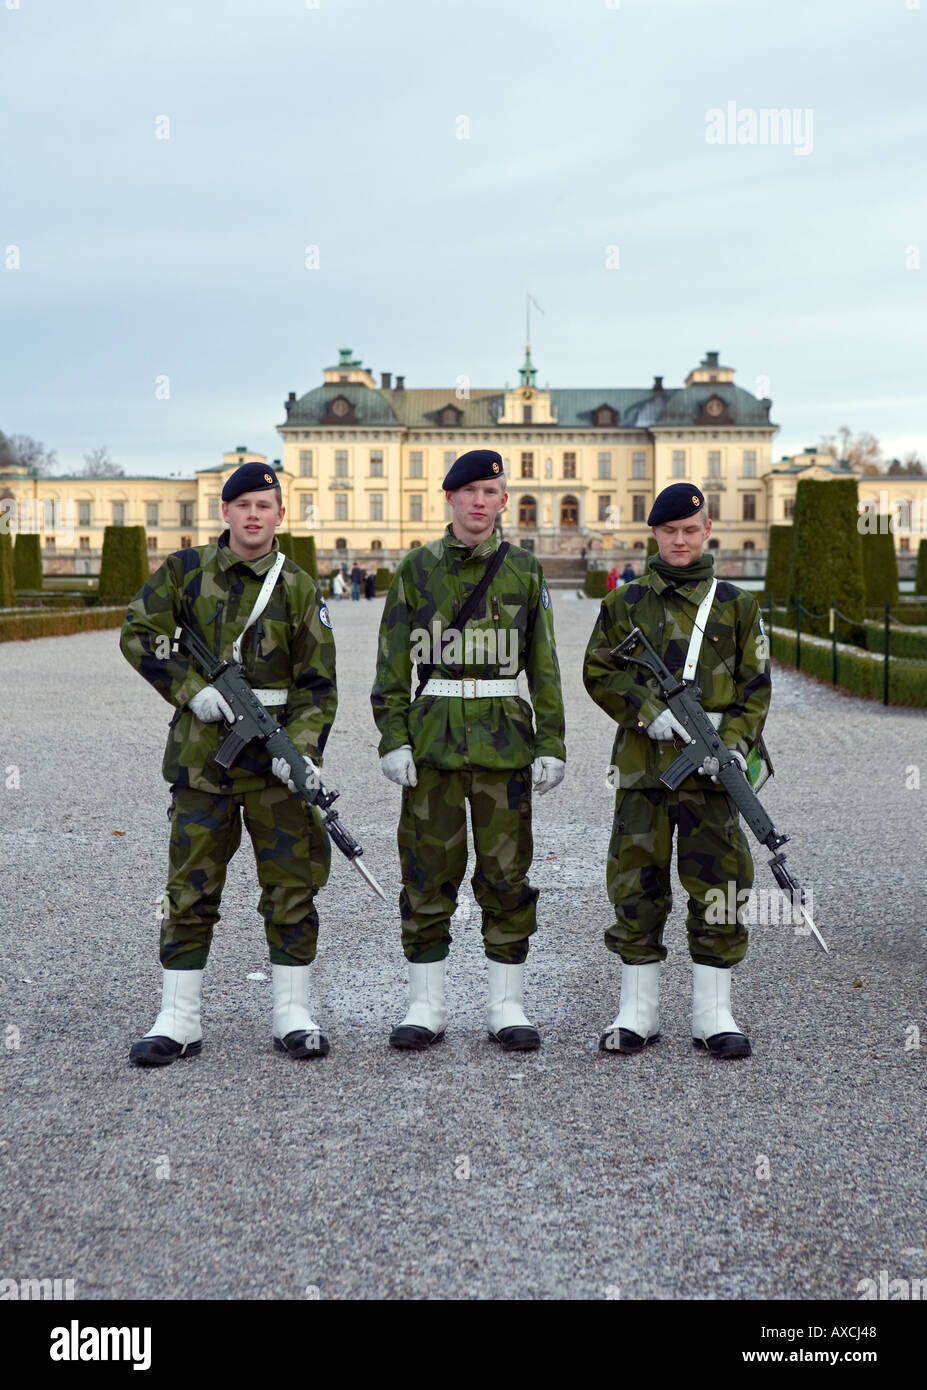 Guard duty at Drottningholm Palace in Sweden Stock Photo